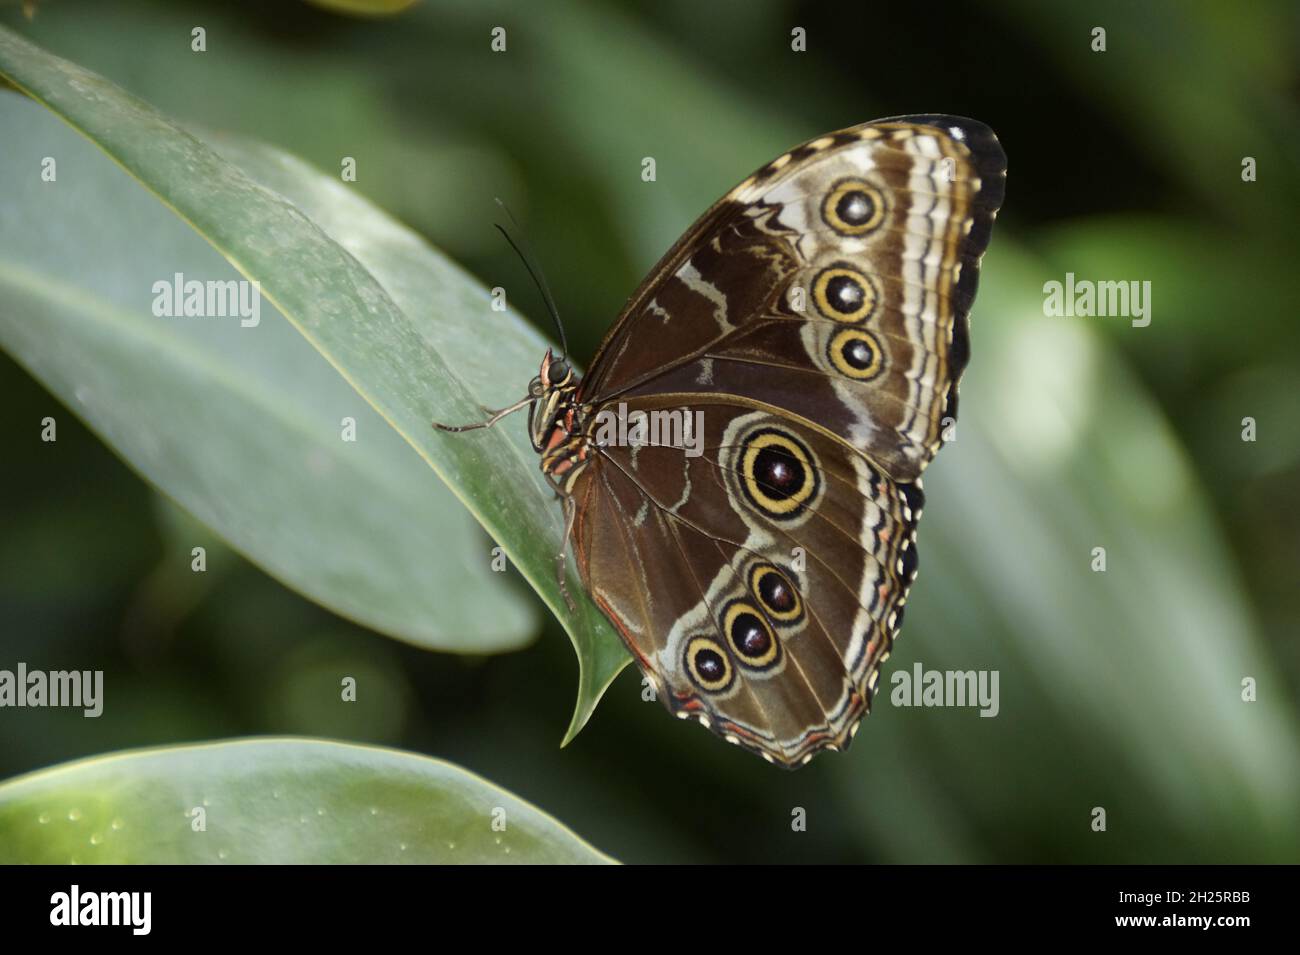 a Common Blue Morpho butterfly with an amazing brown ornament on the underside of its wings sitting on a green leaf Stock Photo